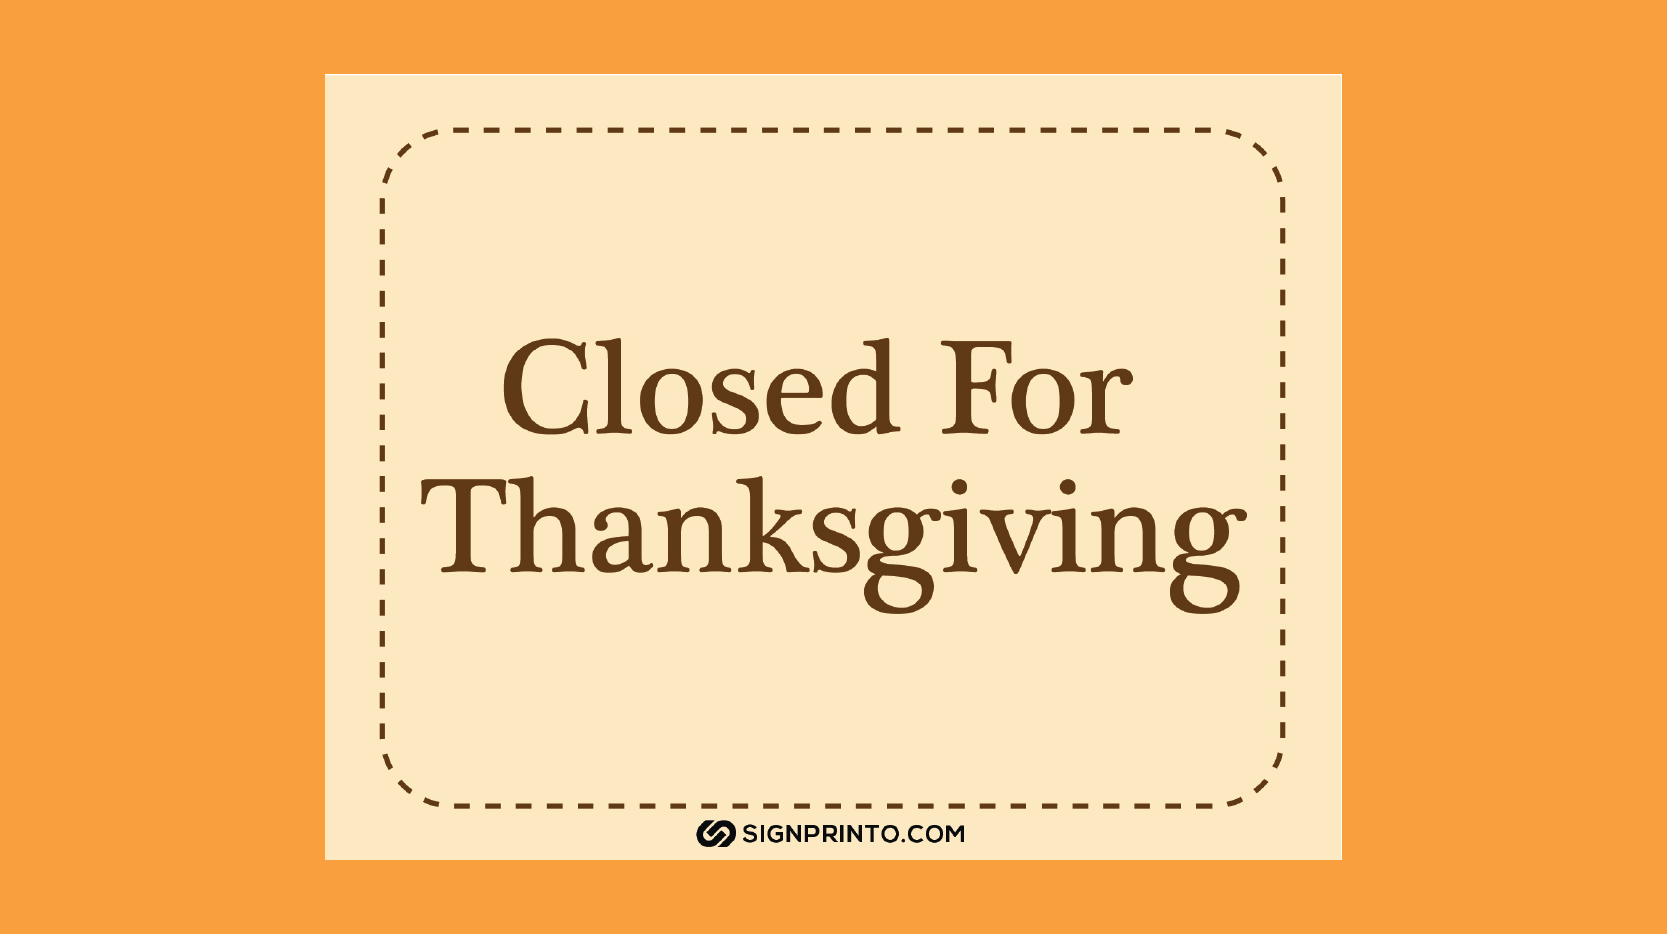 Closed for Thanksgiving Sign